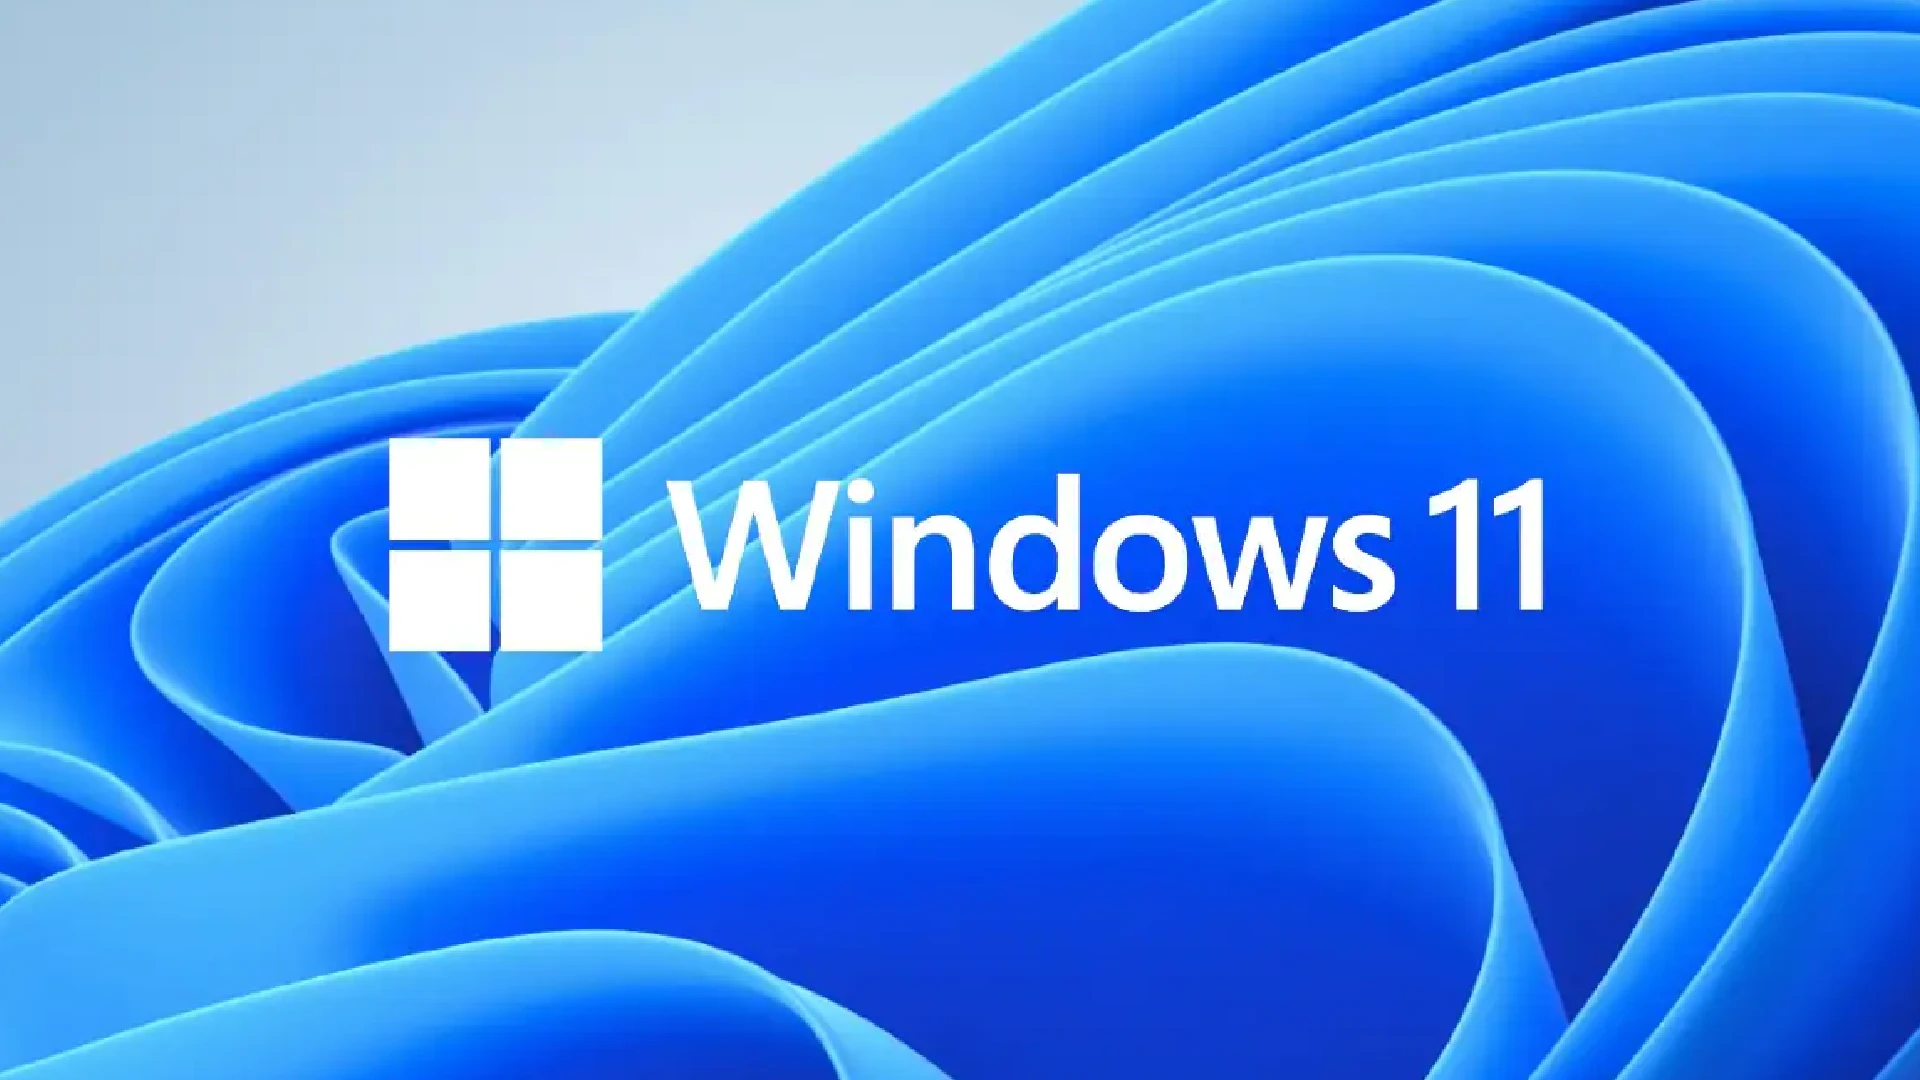 Windows 11 22H2 Drivers are now Released